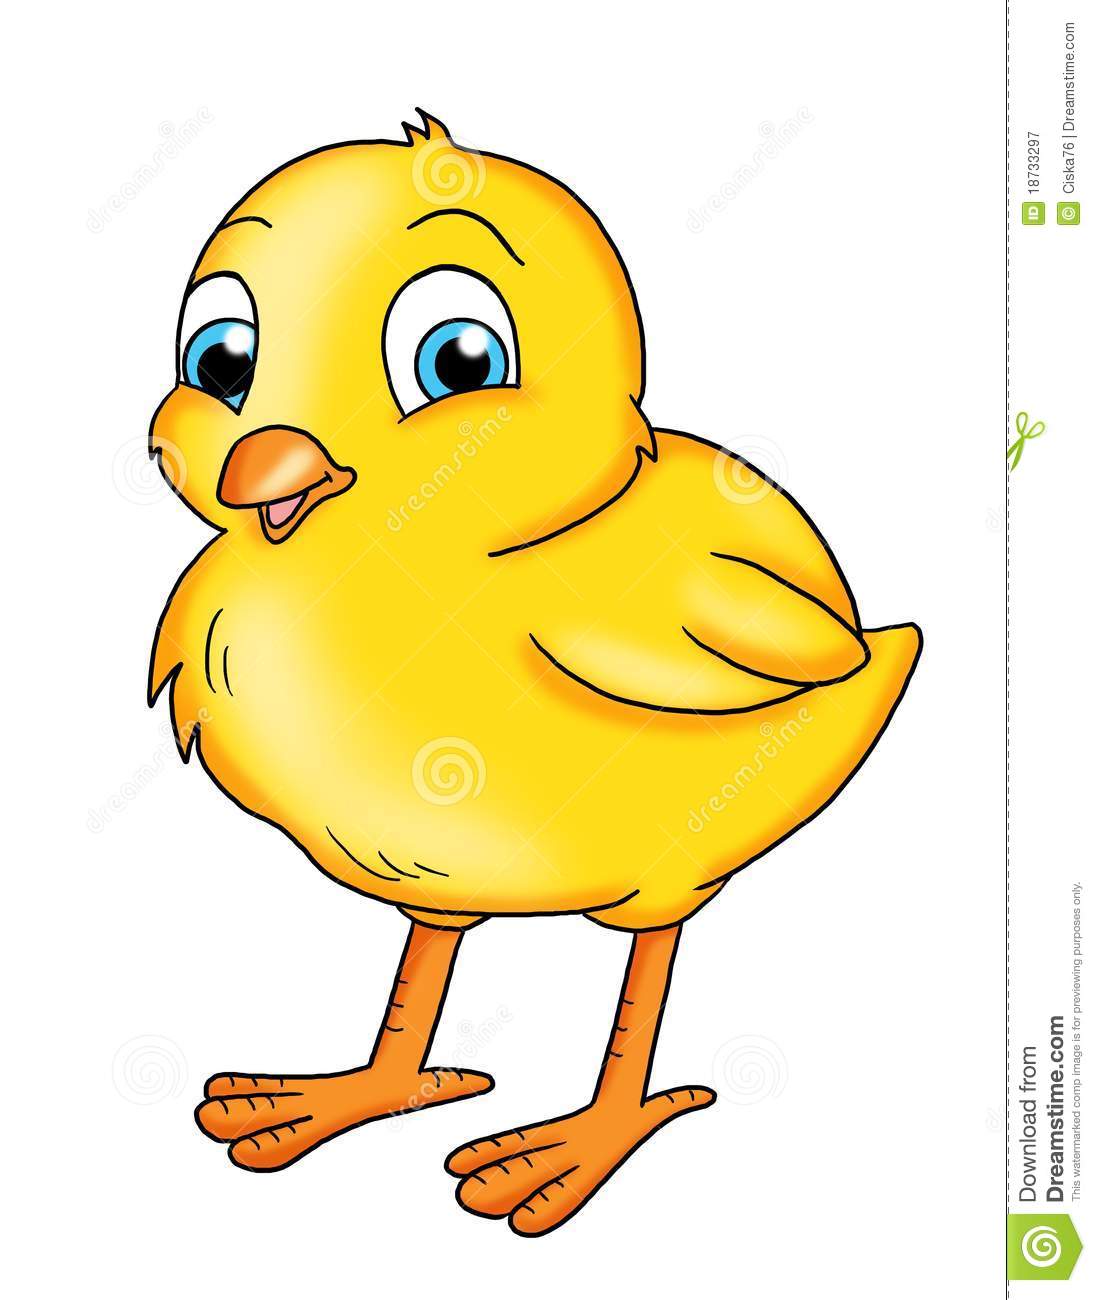 Baby Chick Royalty Free Stock Photography Image 18733297